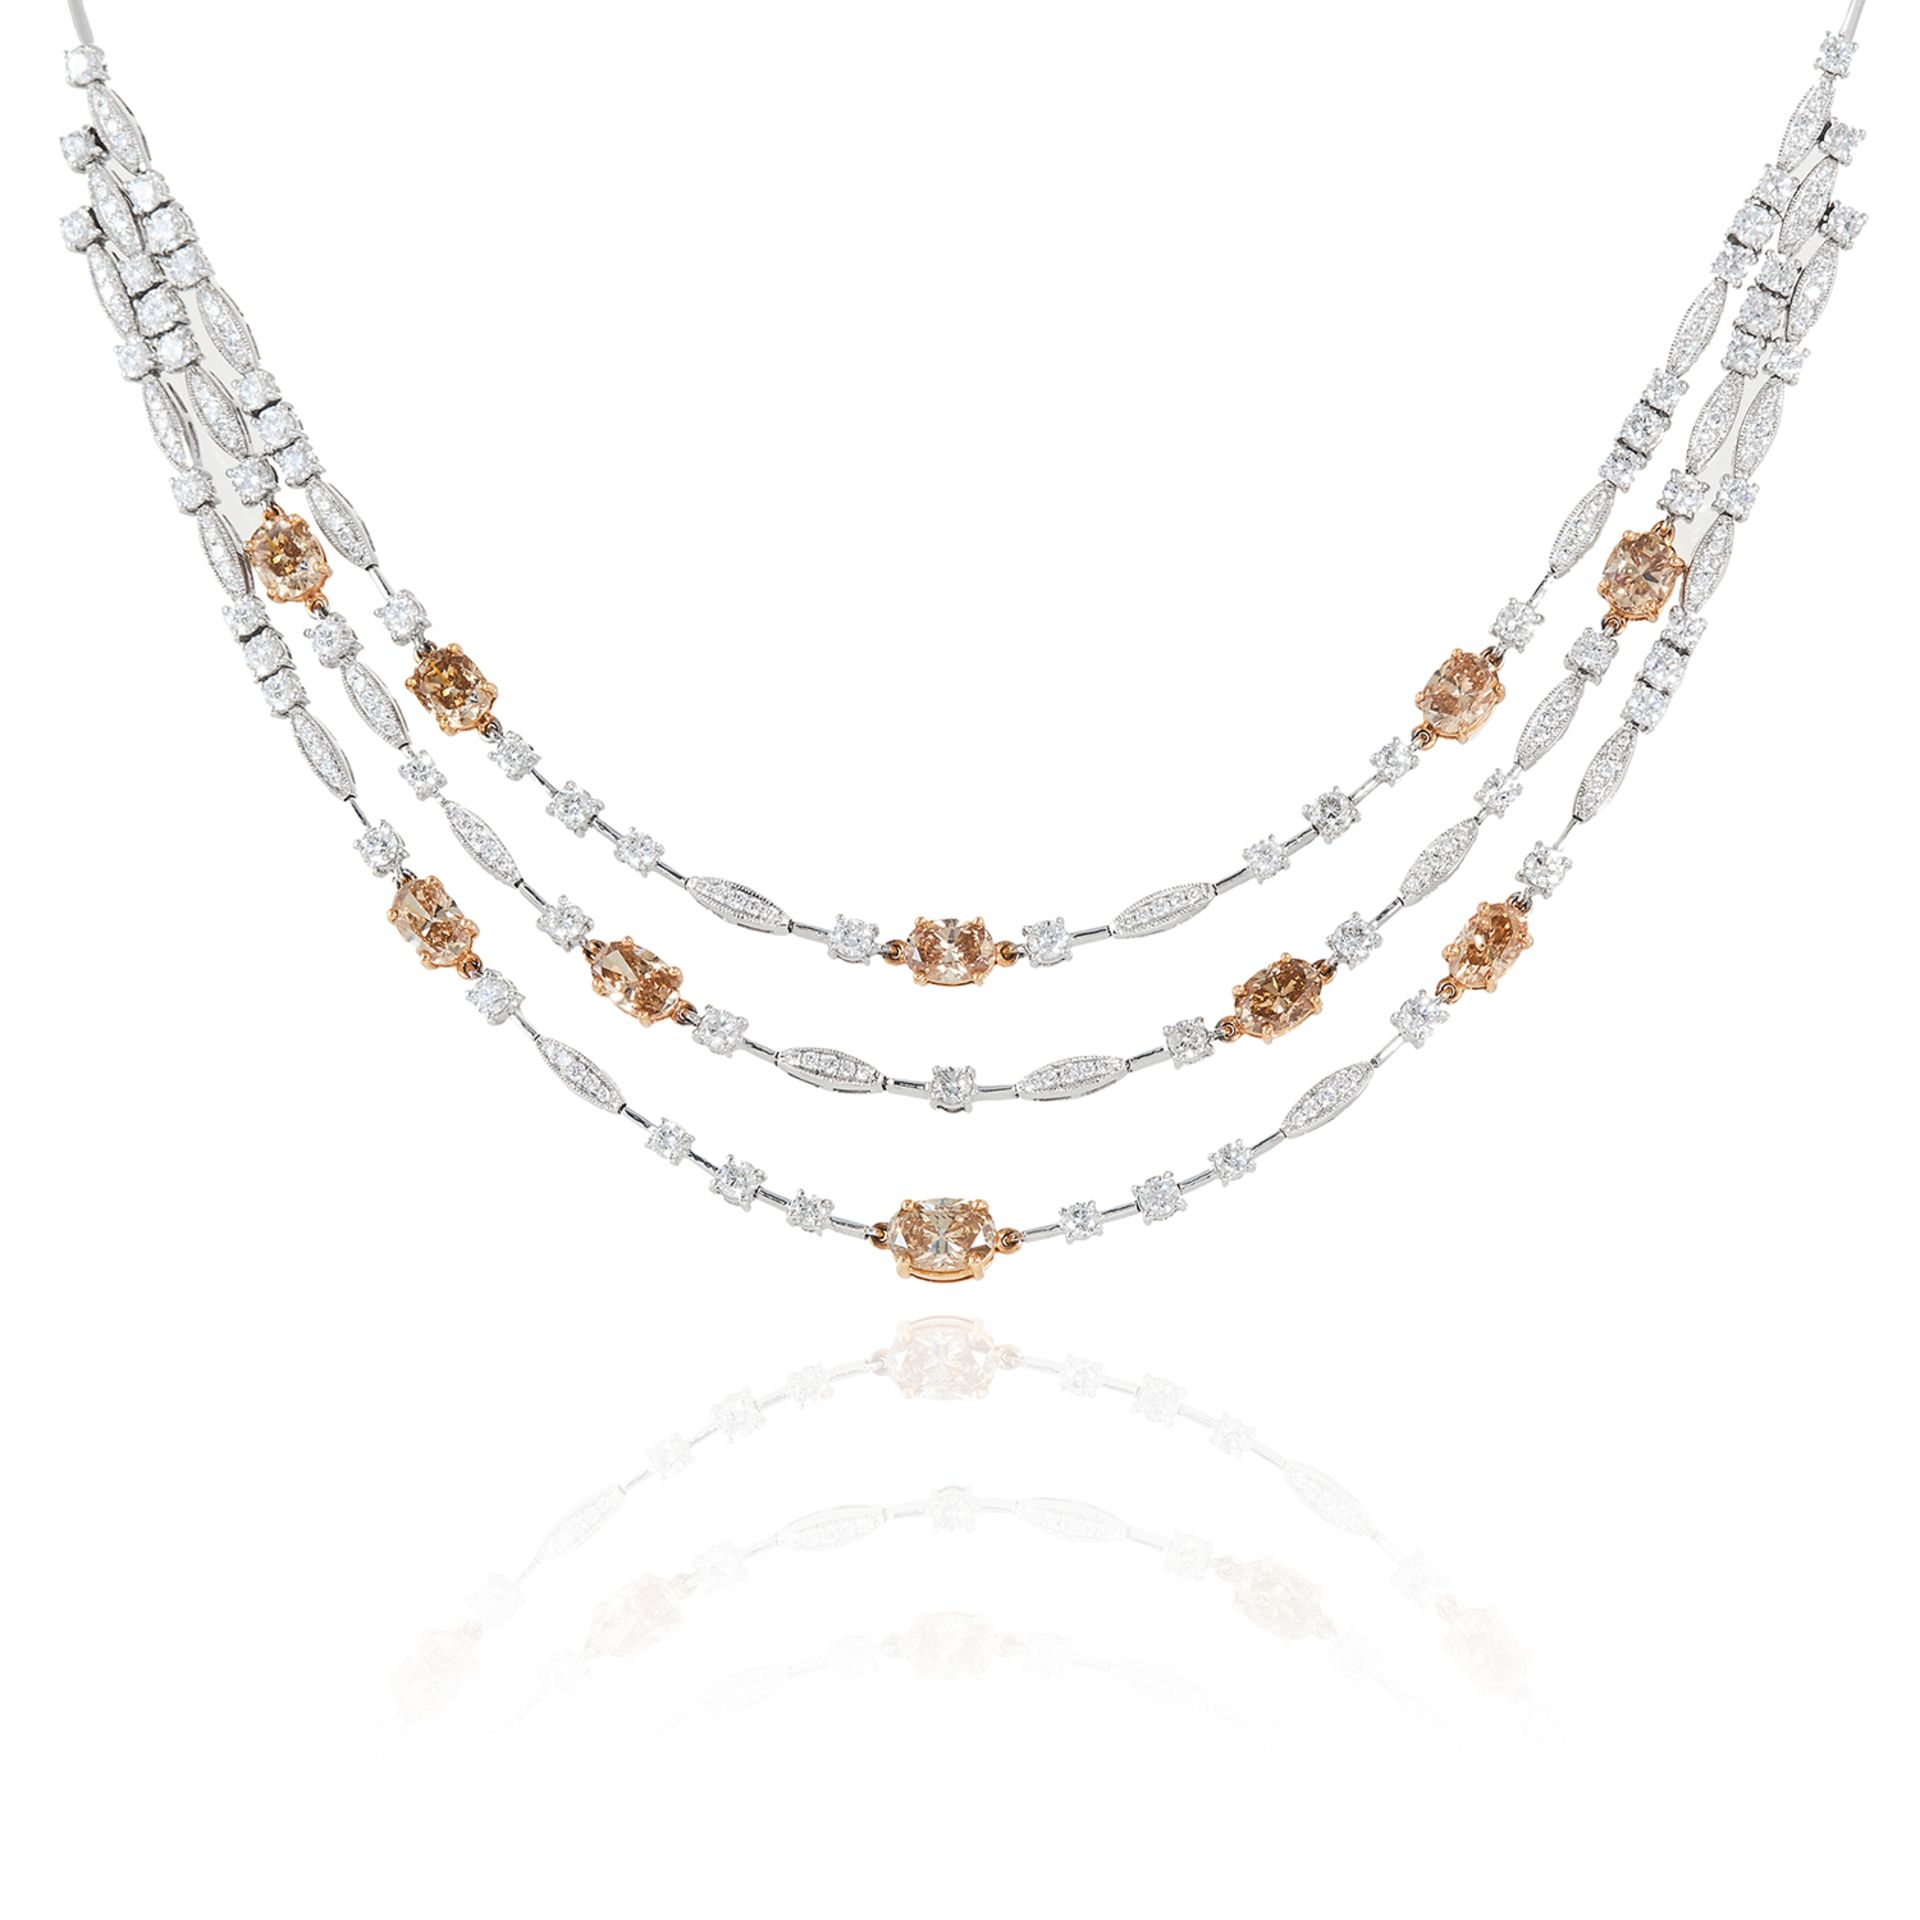 A 10.90 CARAT DIAMOND NECKLACE in 18ct white gold, designed as a trio of rows of white diamond